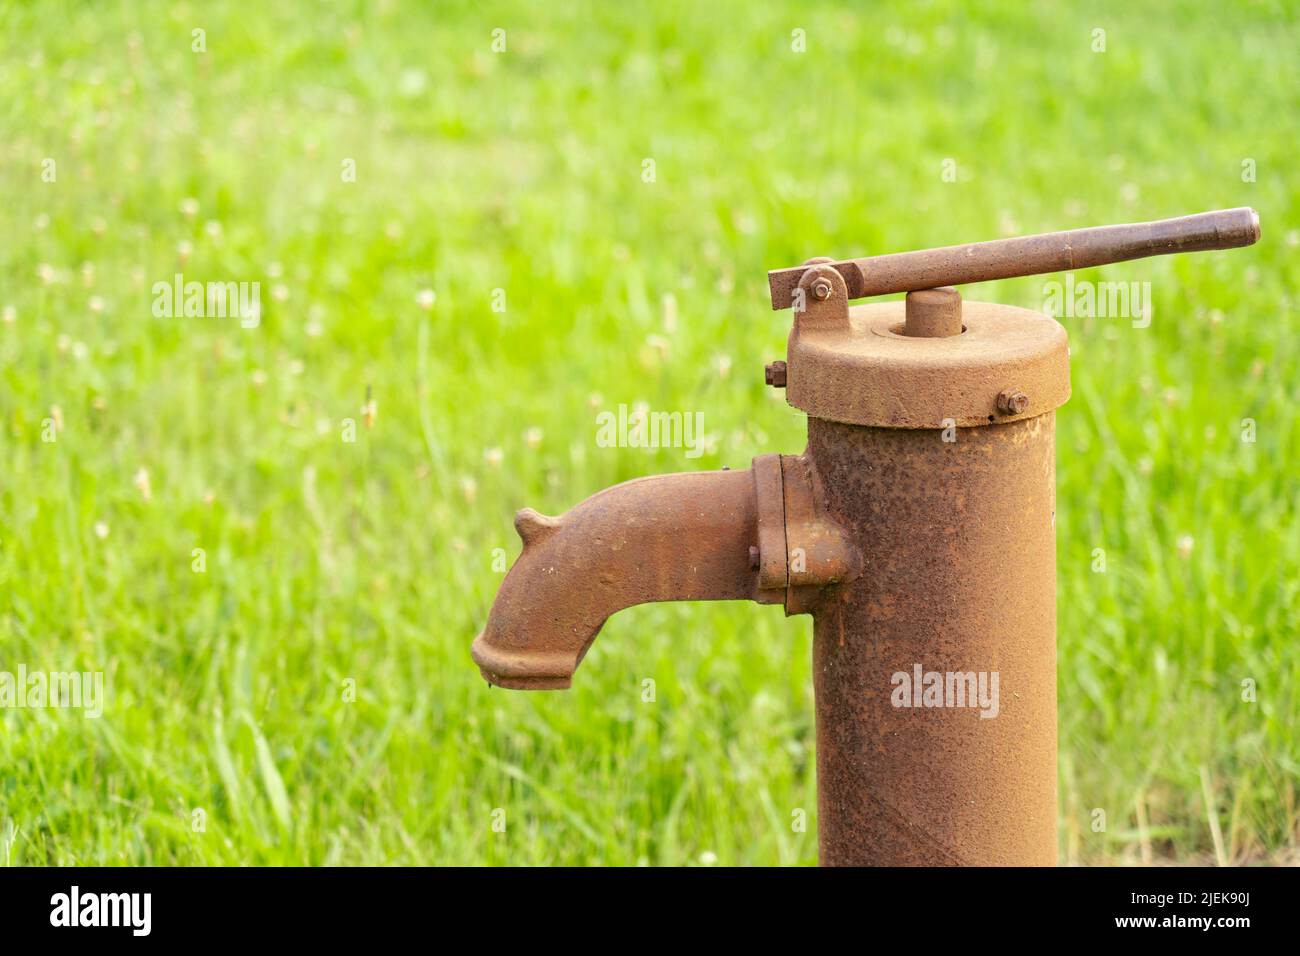 Rusty old hand pump against a blurry background of green grass Stock Photo